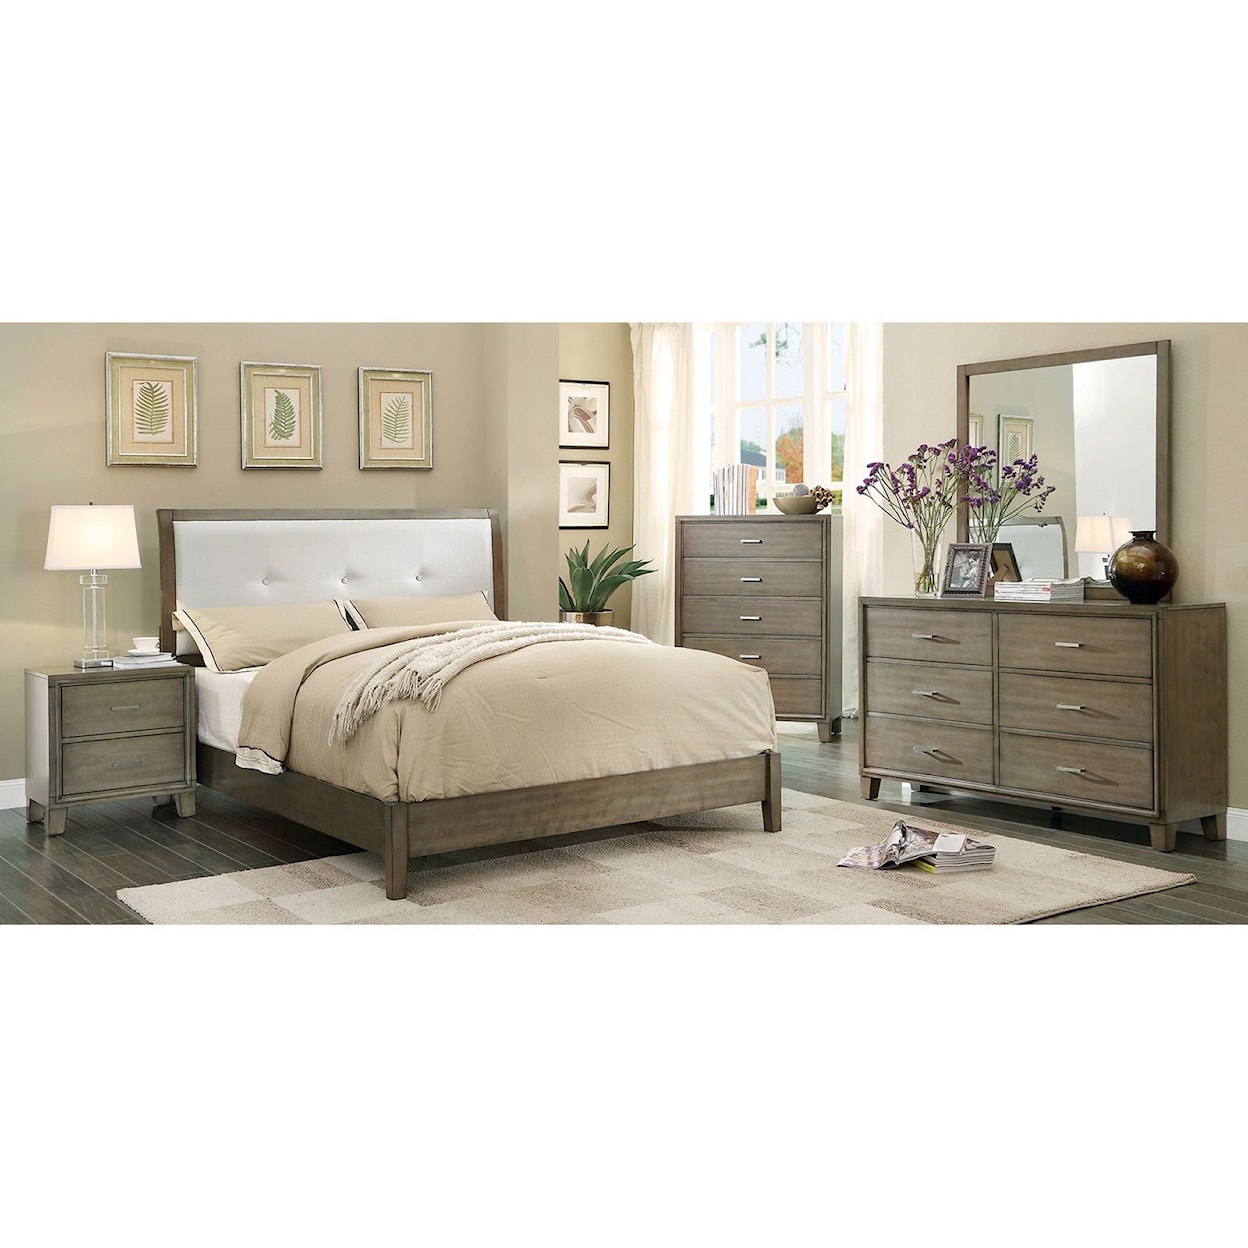 Furniture of America Enrico California King Upholstered Bed